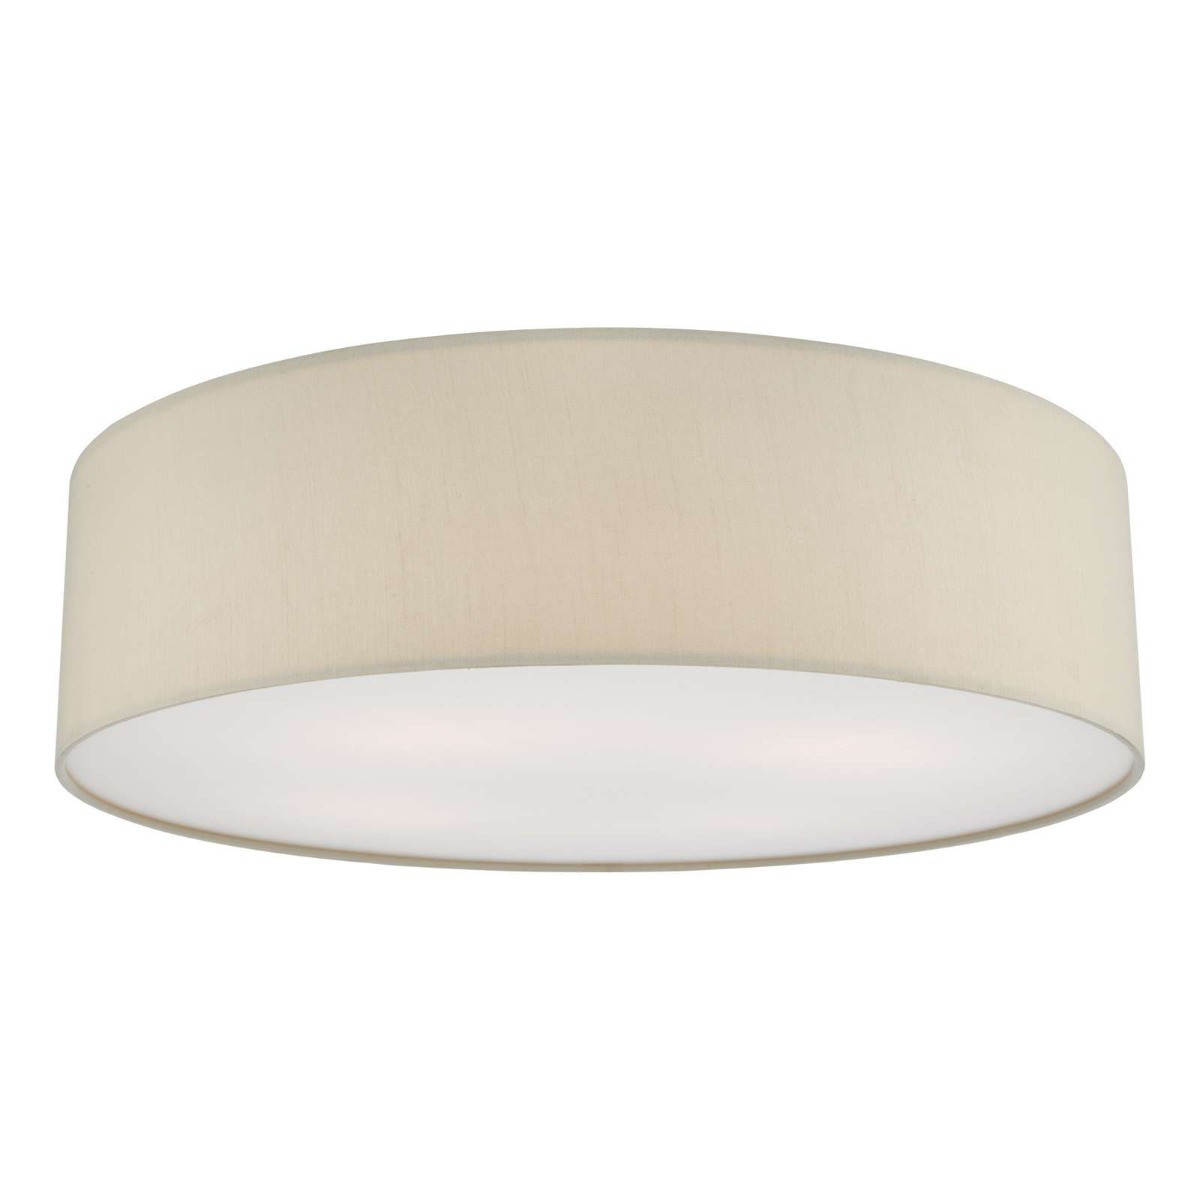 Dar Lighting Cierro 4 Light Flush Ceiling Light With Taupe Shade And White Diffuser 60 cm